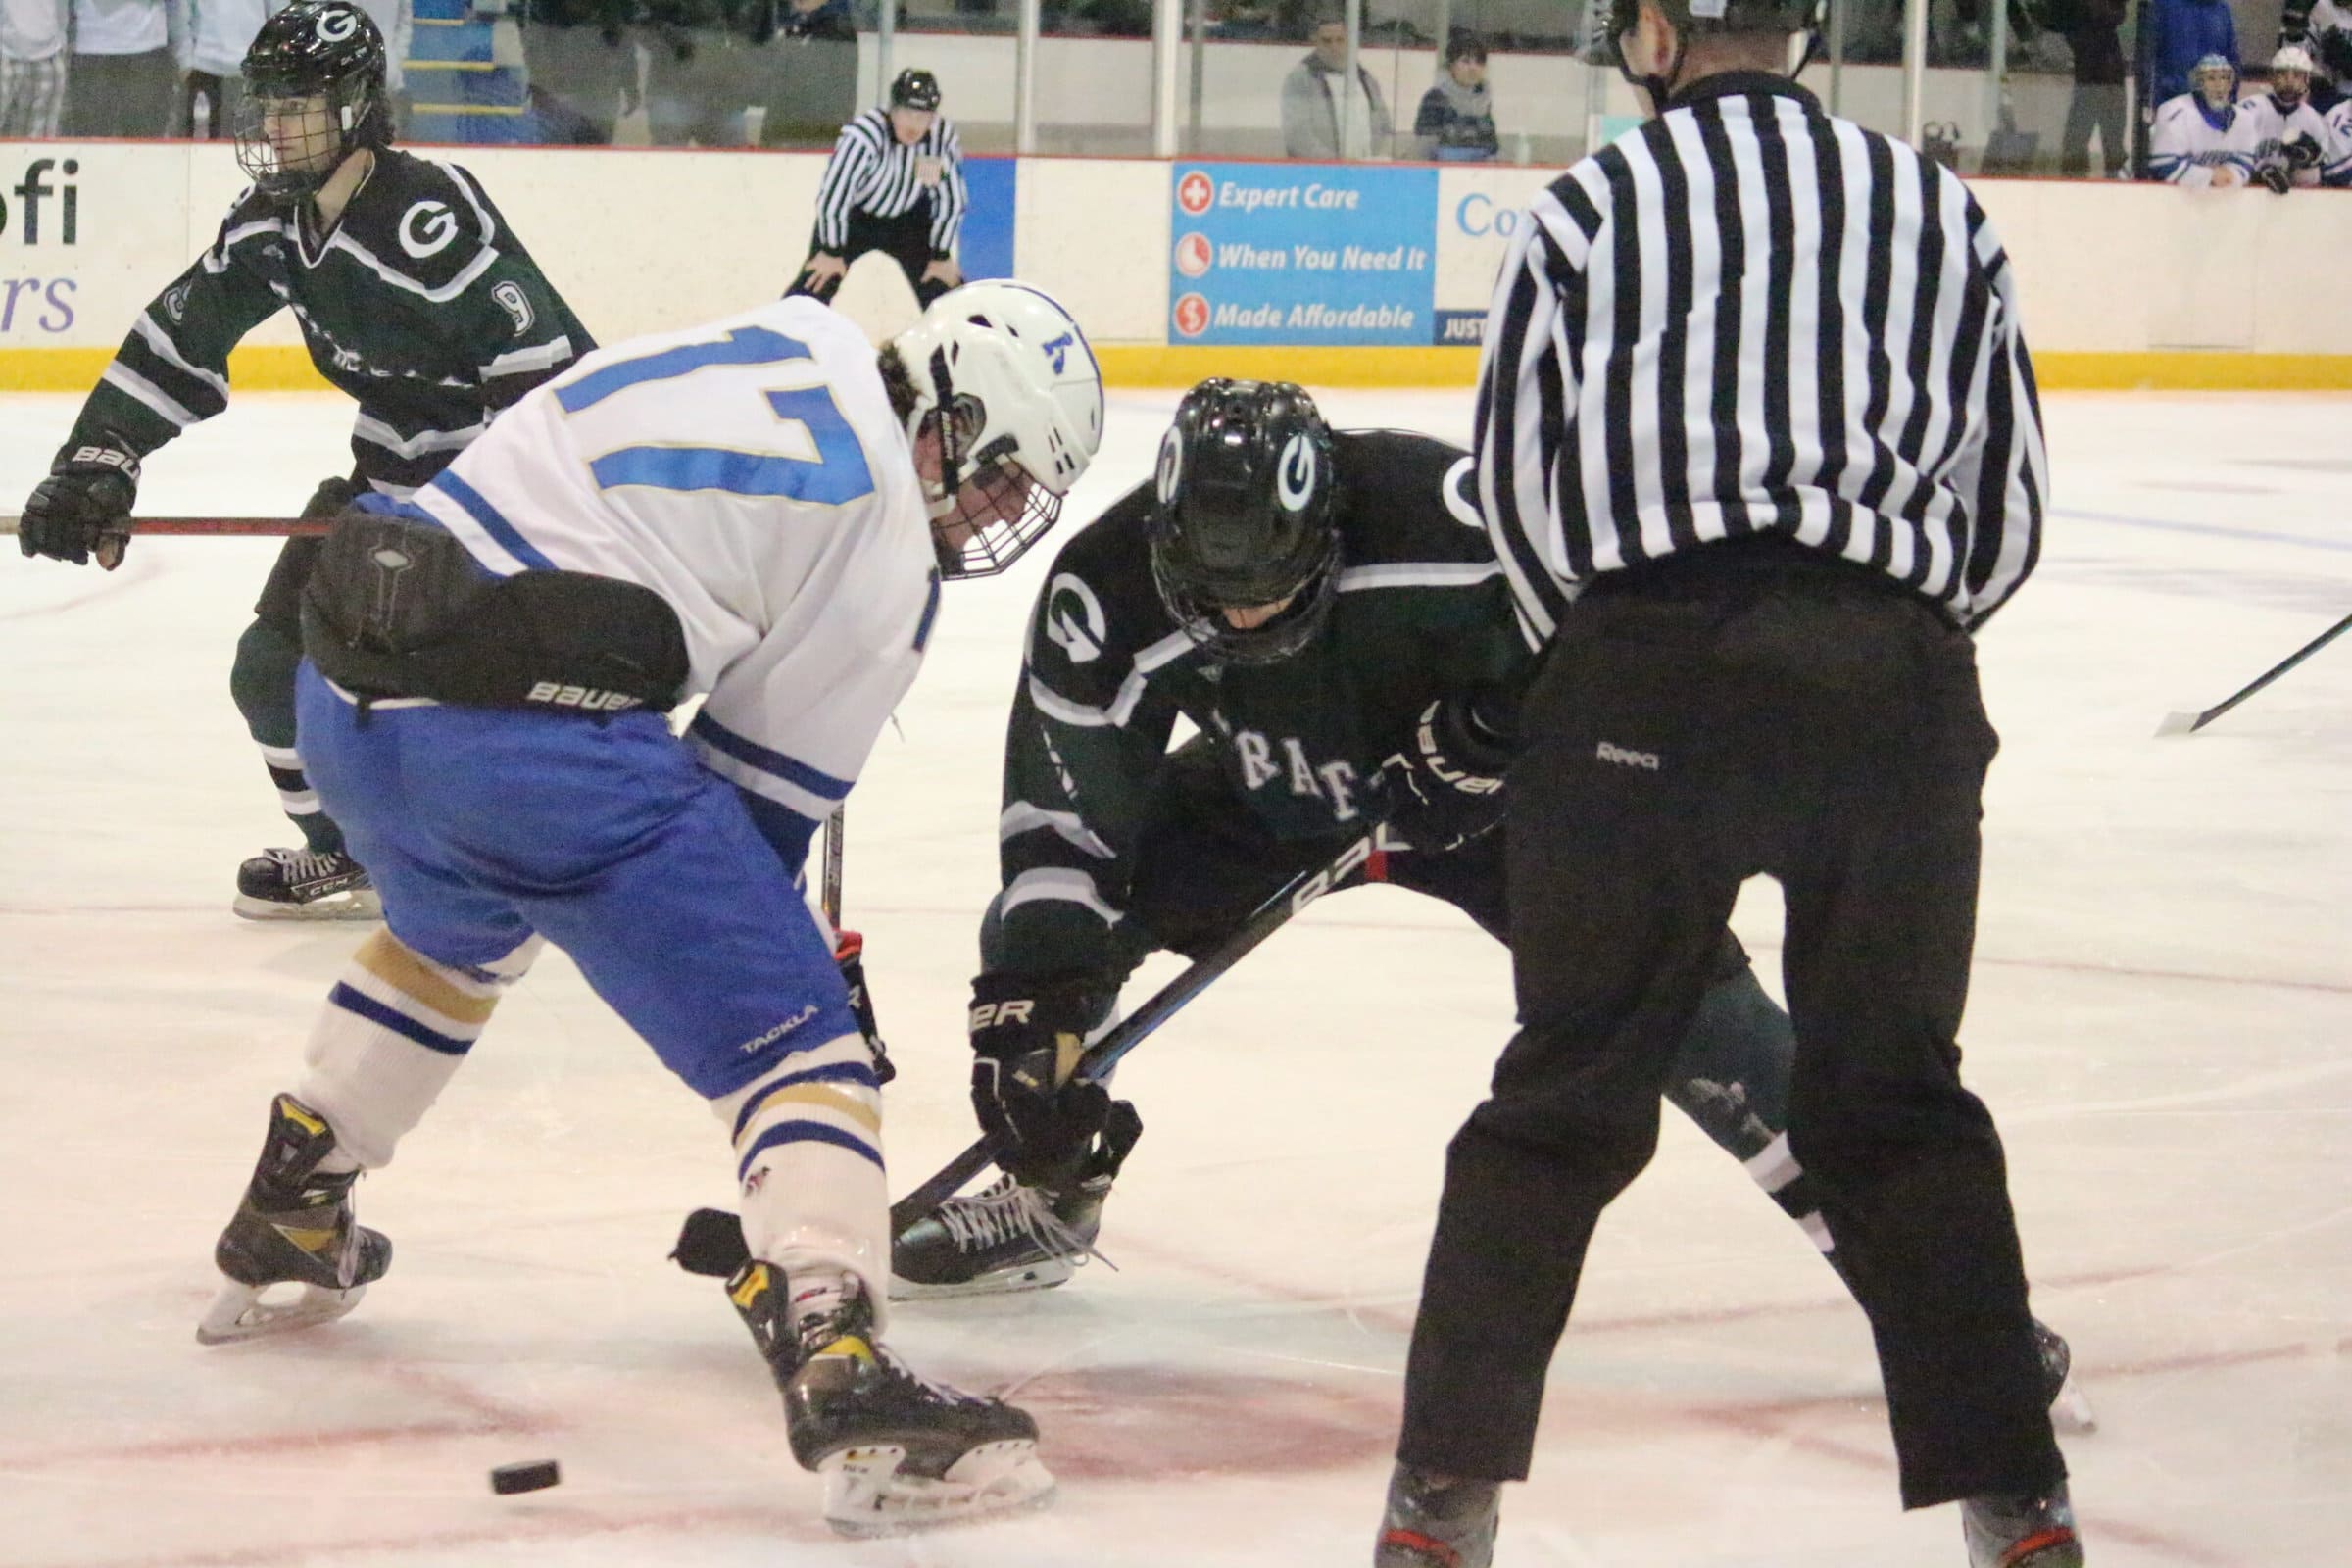 Grafton’s hockey title hopes dashed by Norwell in semifinals